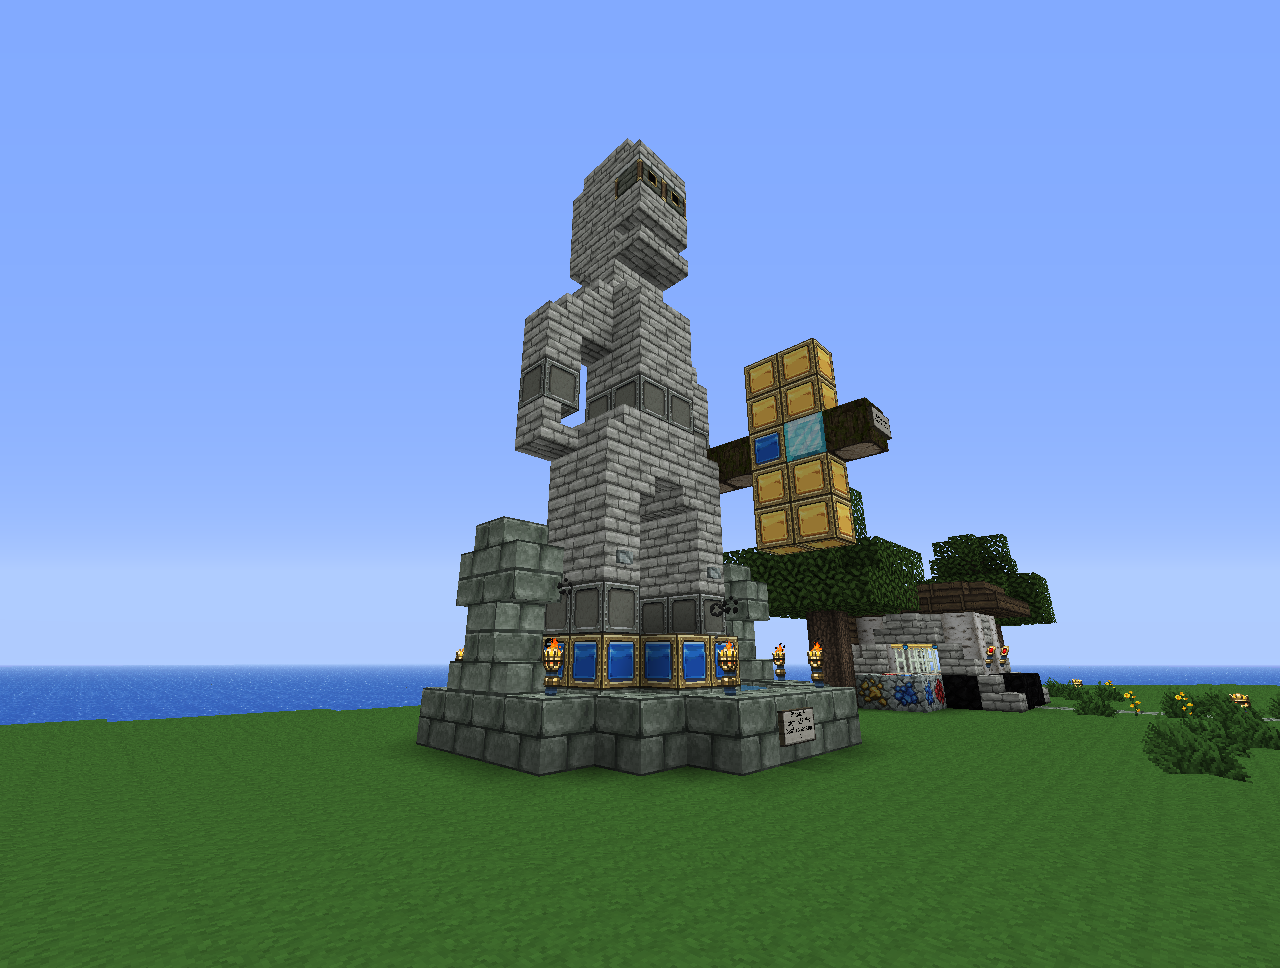 Statue to Stgram12
This is the statue to the admin in the server i play on, i made :)
Today i called him to see it and he said "yeey!", flew around